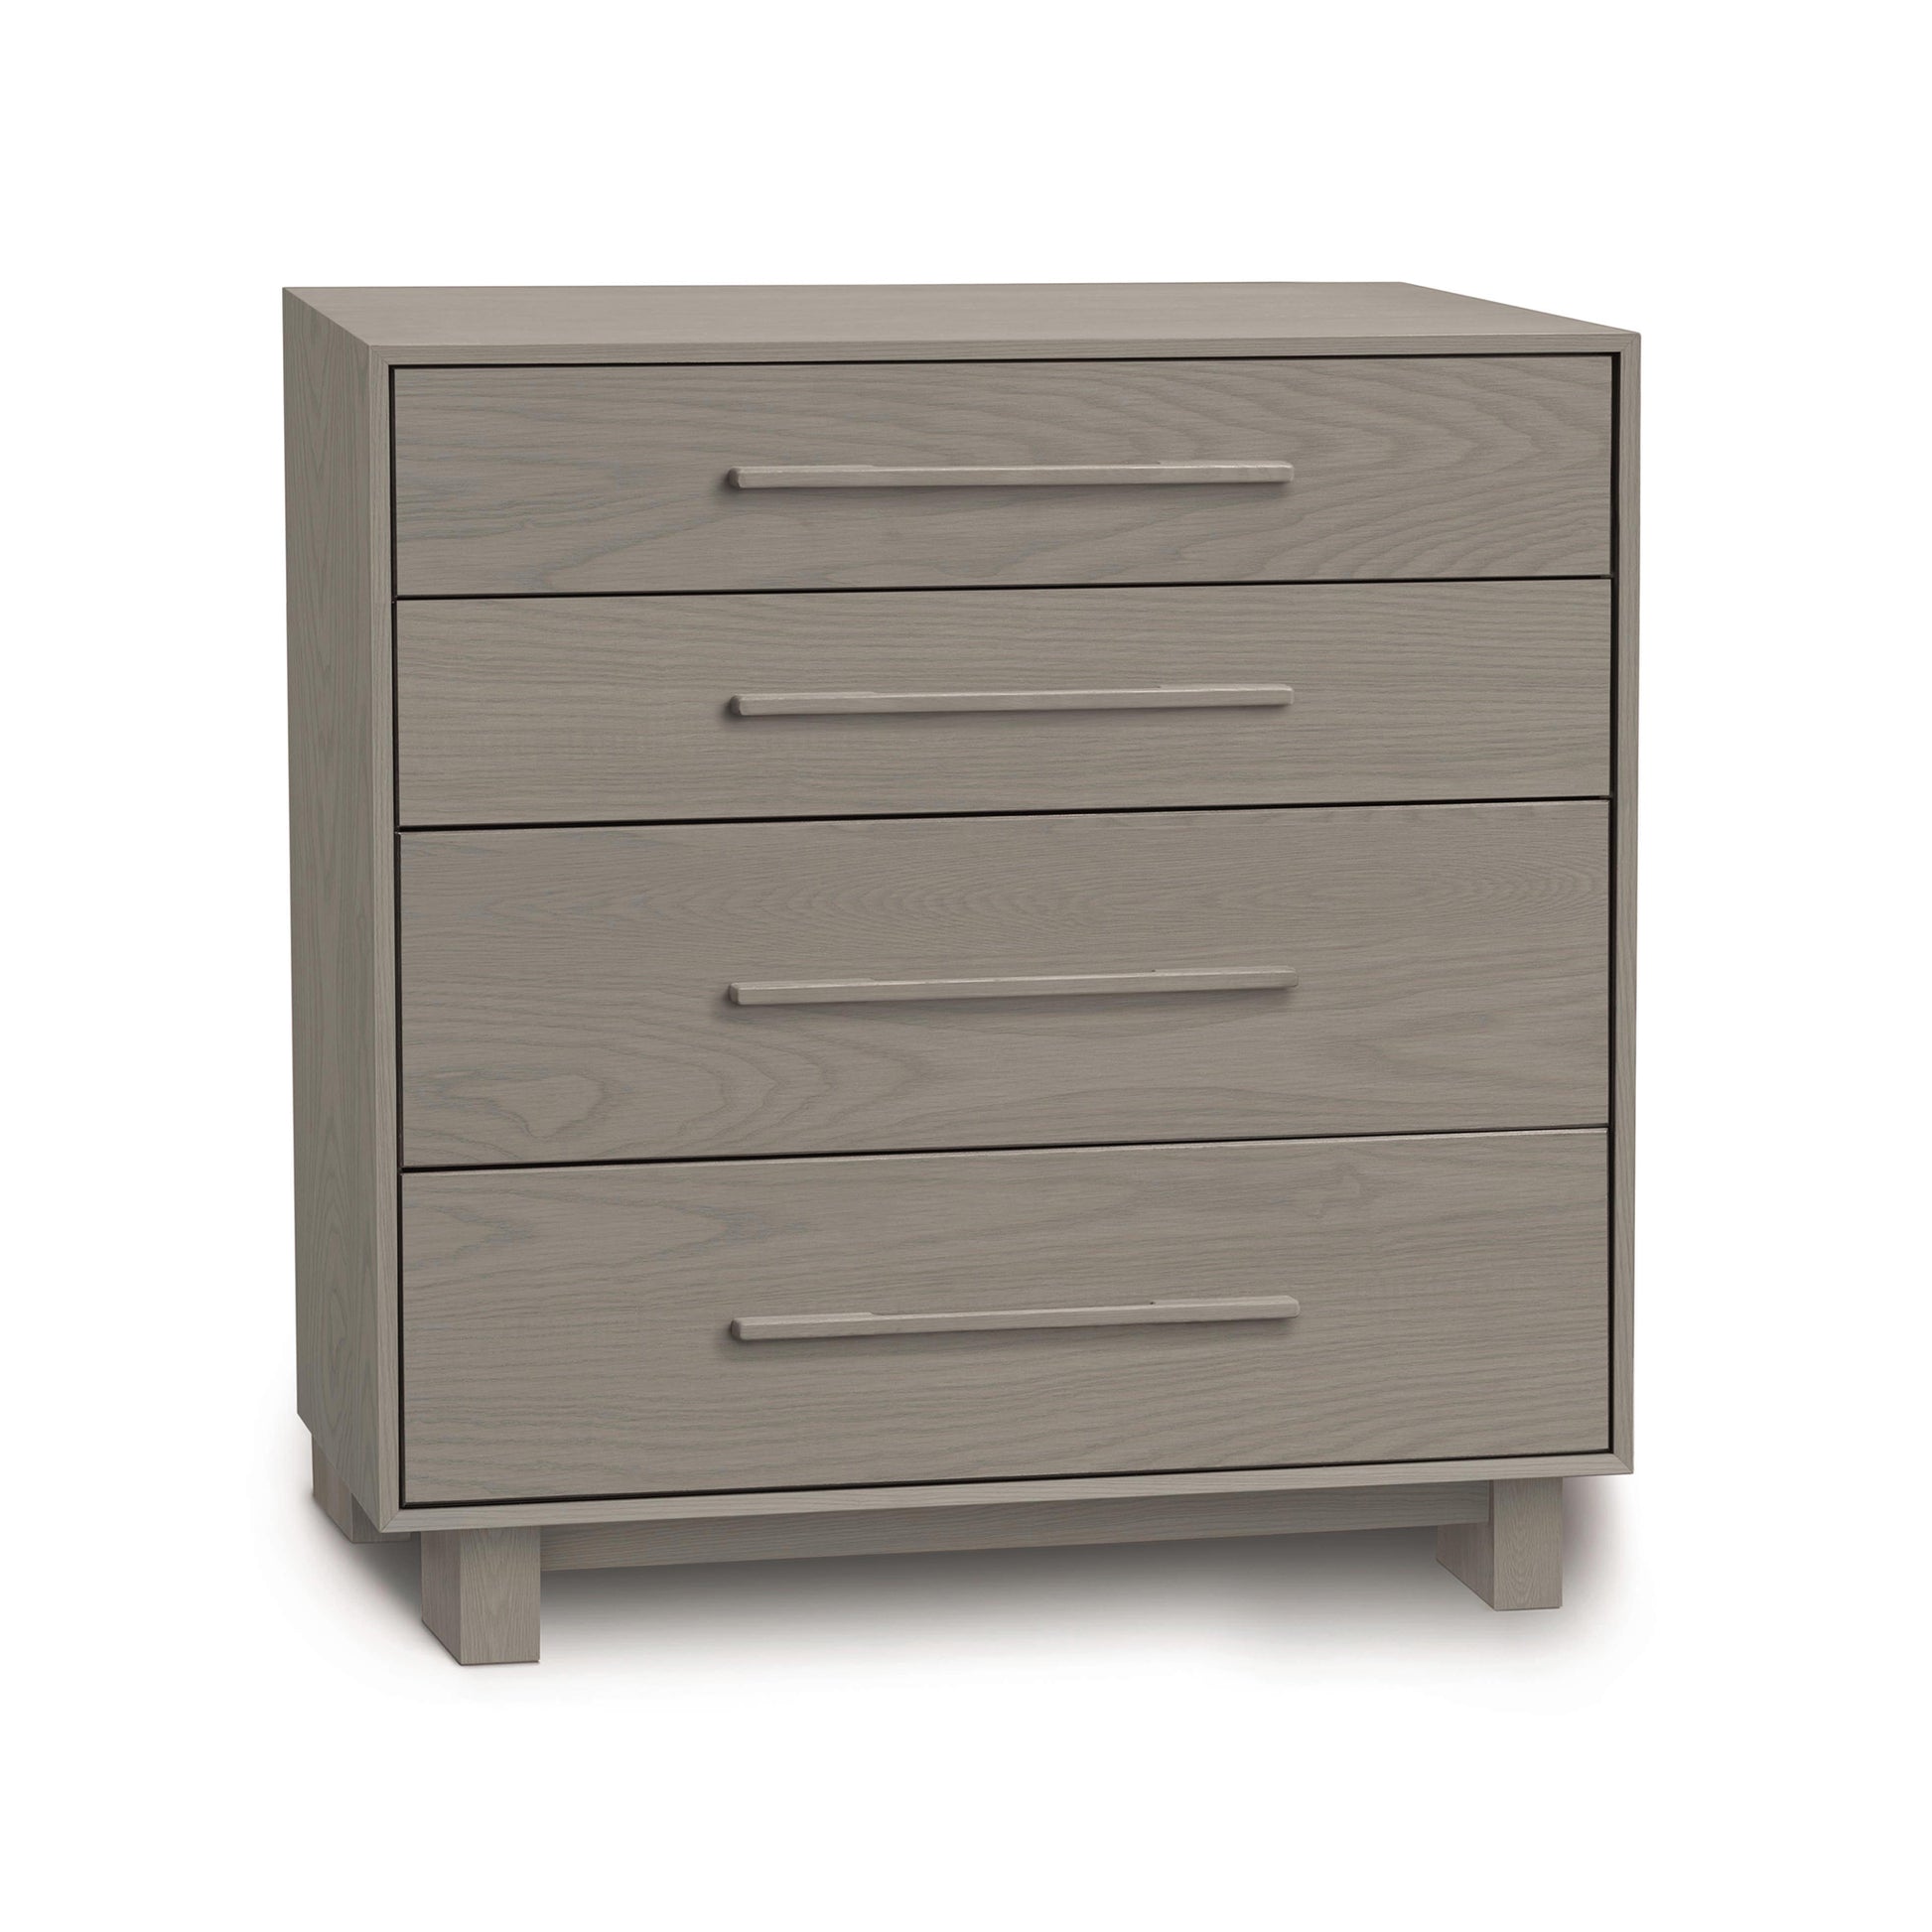 A contemporary Copeland Furniture Sloane 4-Drawer Chest against a white background.